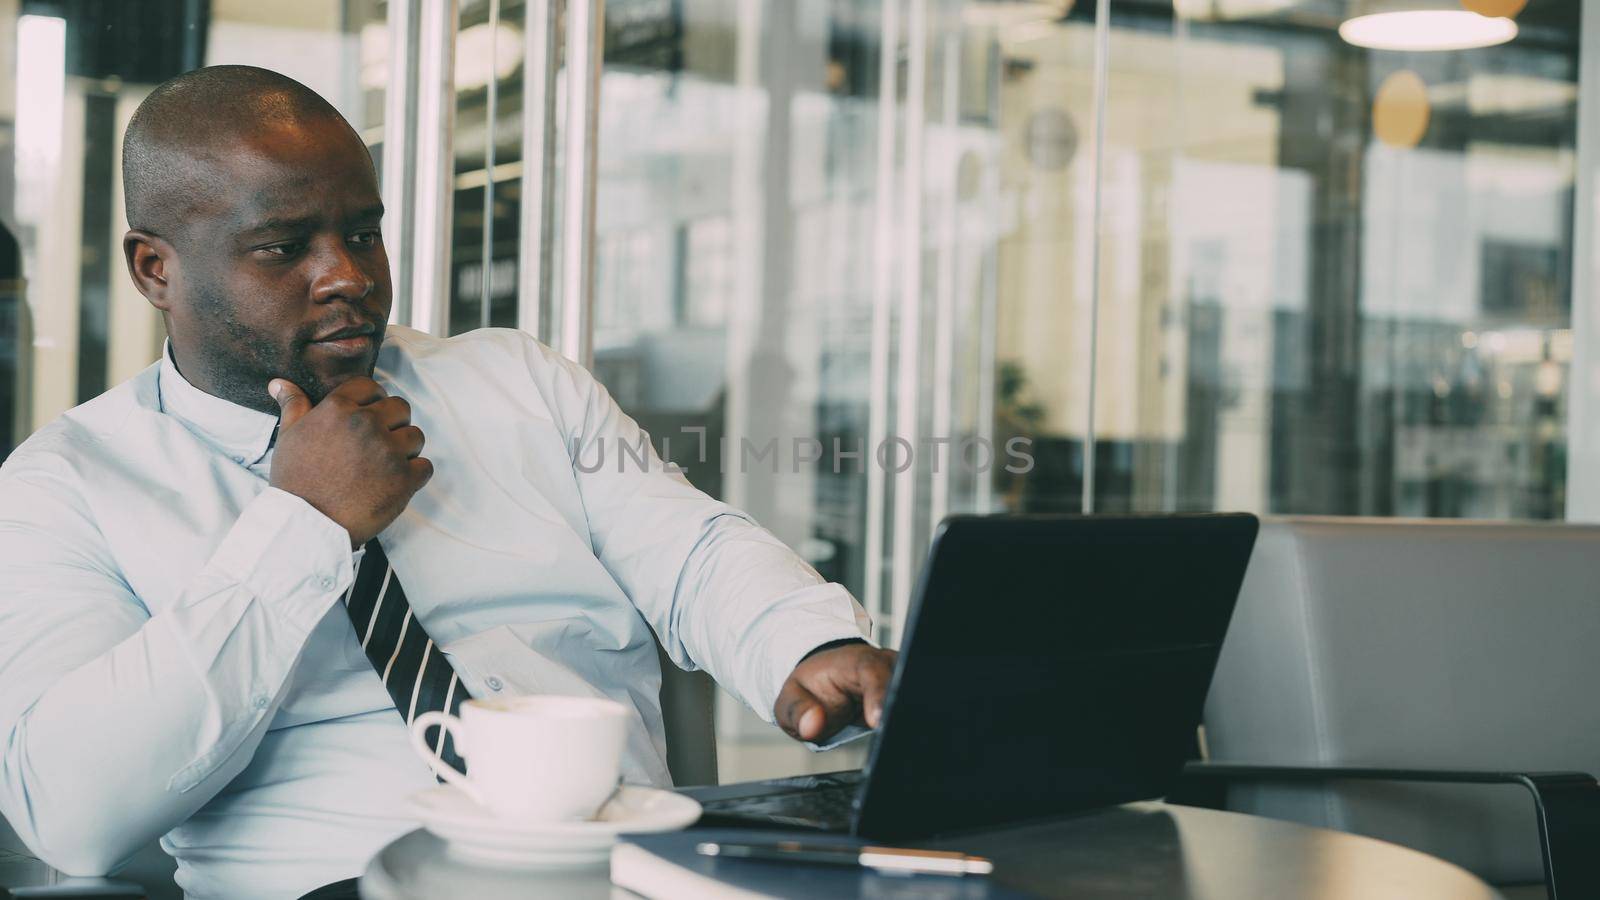 Portrait of African American businessman in formal clothes thinking, printing and working on his laptop in glassy cafe during lunch break. Coffee is on his table.